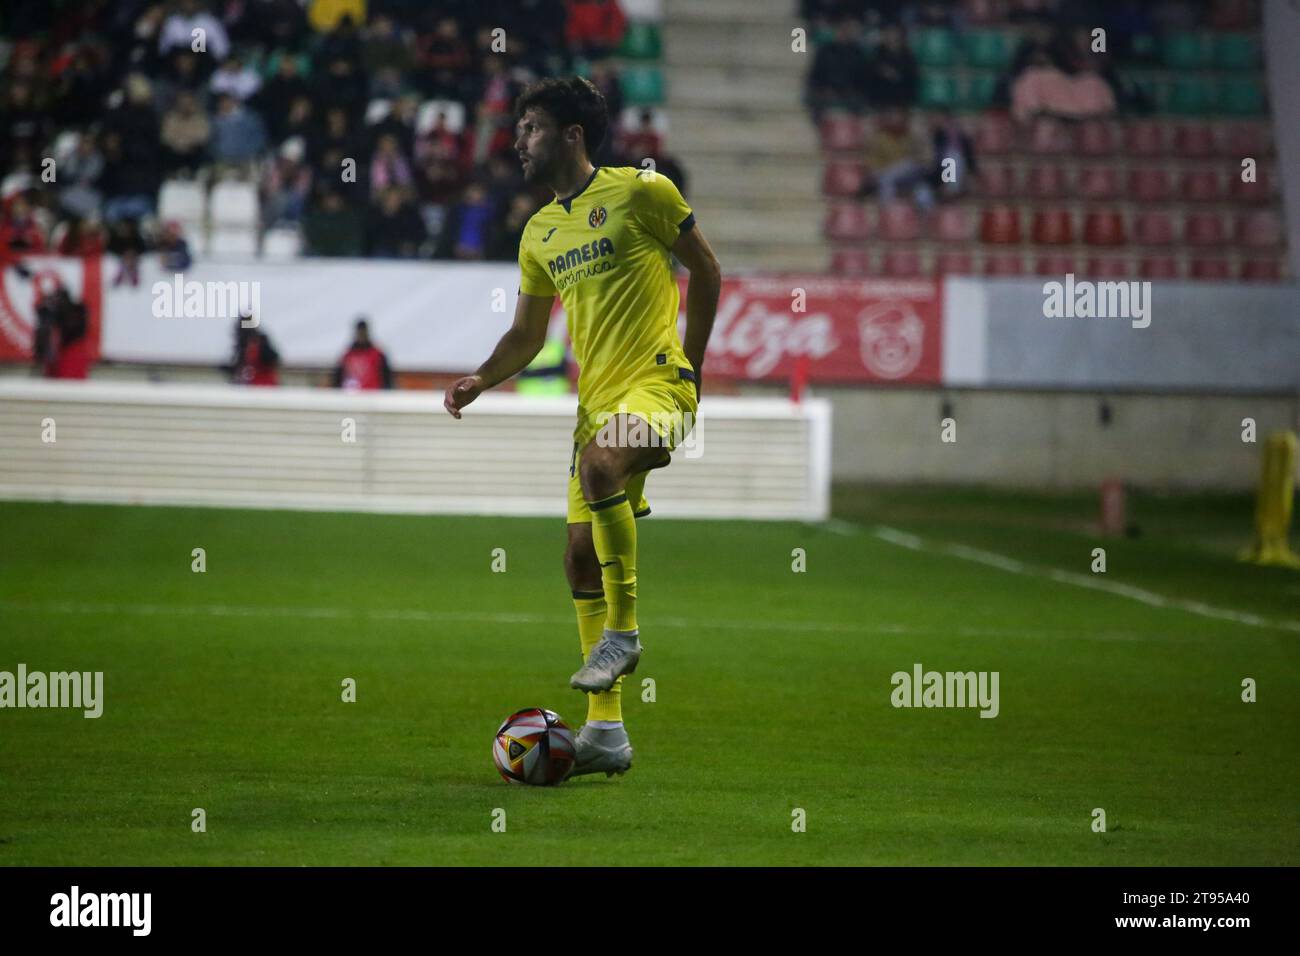 Zamora, Spain, 22th November, 2023: Villarreal CF's player, Alfonso Pedraza (24) with the ball during the Second round of the SM El Rey Cup 2023-24 between Zamora CF and Villarreal CF, on November 22 of 2023, at the Ruta de la Plata Stadium, in Zamora, Spain. Credit: Alberto Brevers / Alamy Live News Stock Photo